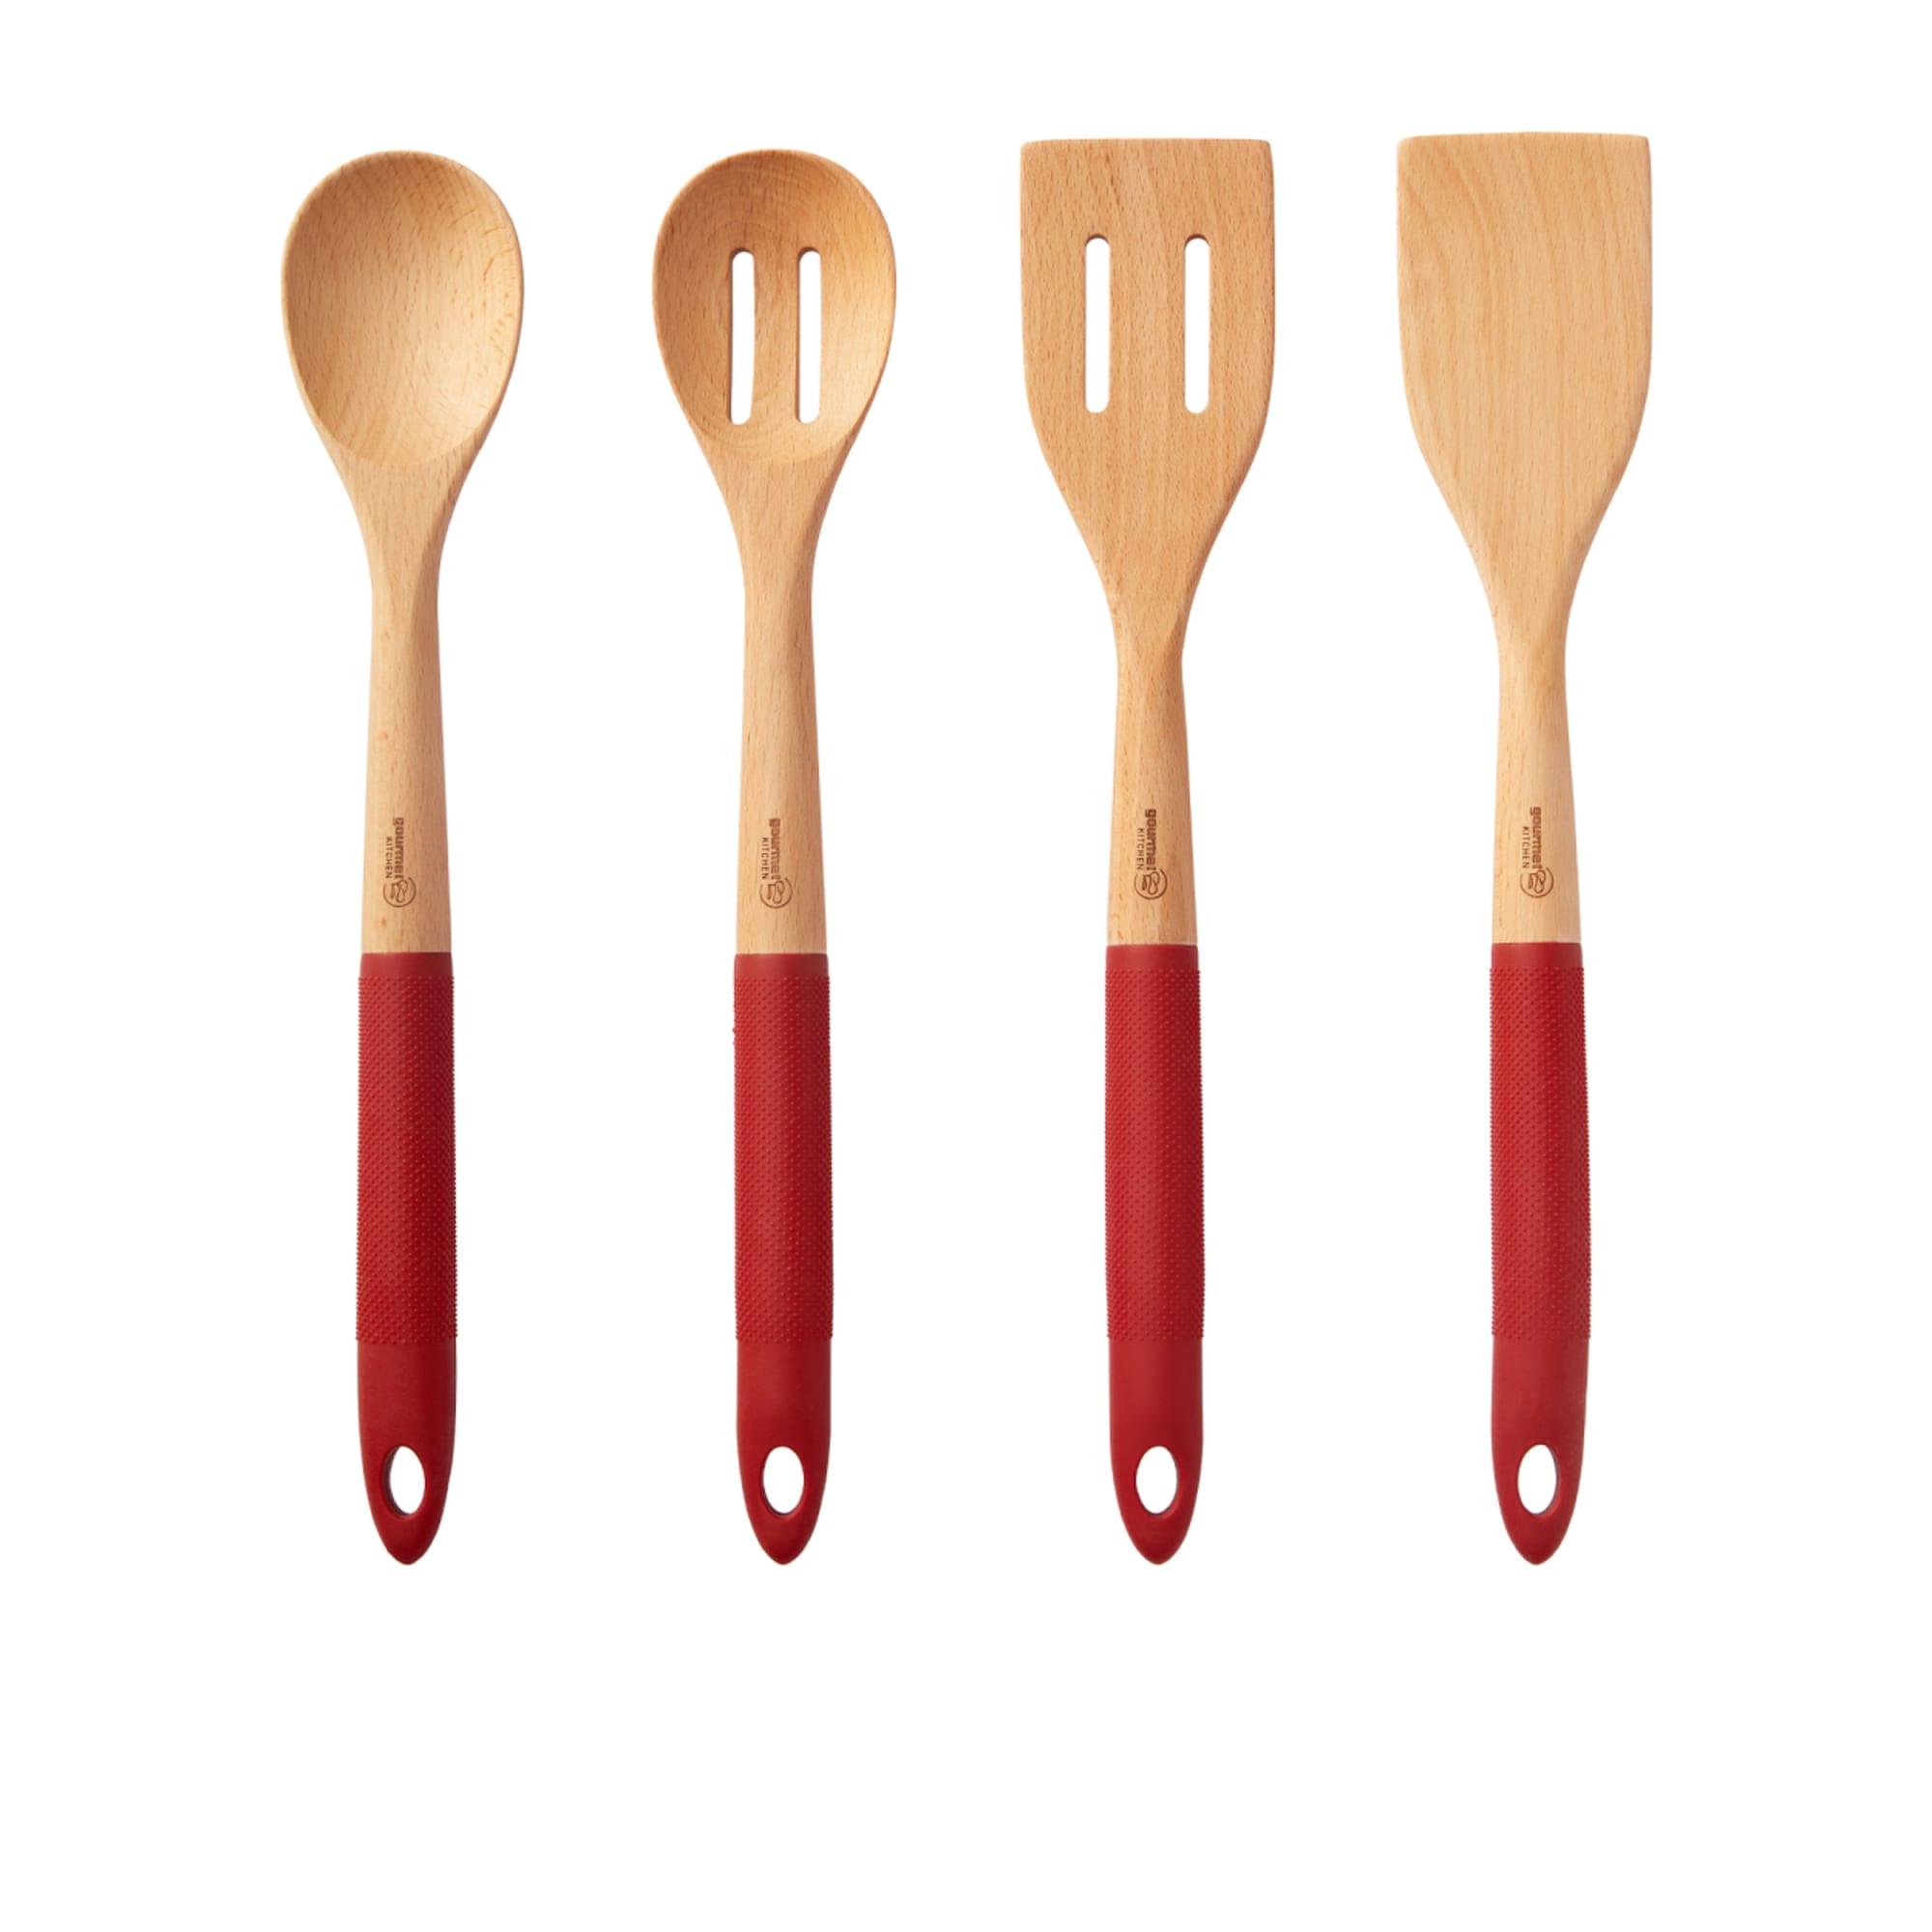 Gourmet Kitchen Rustic Beech Wood Kitchen Utensil Set with Silicone Grip 4pc Image 3